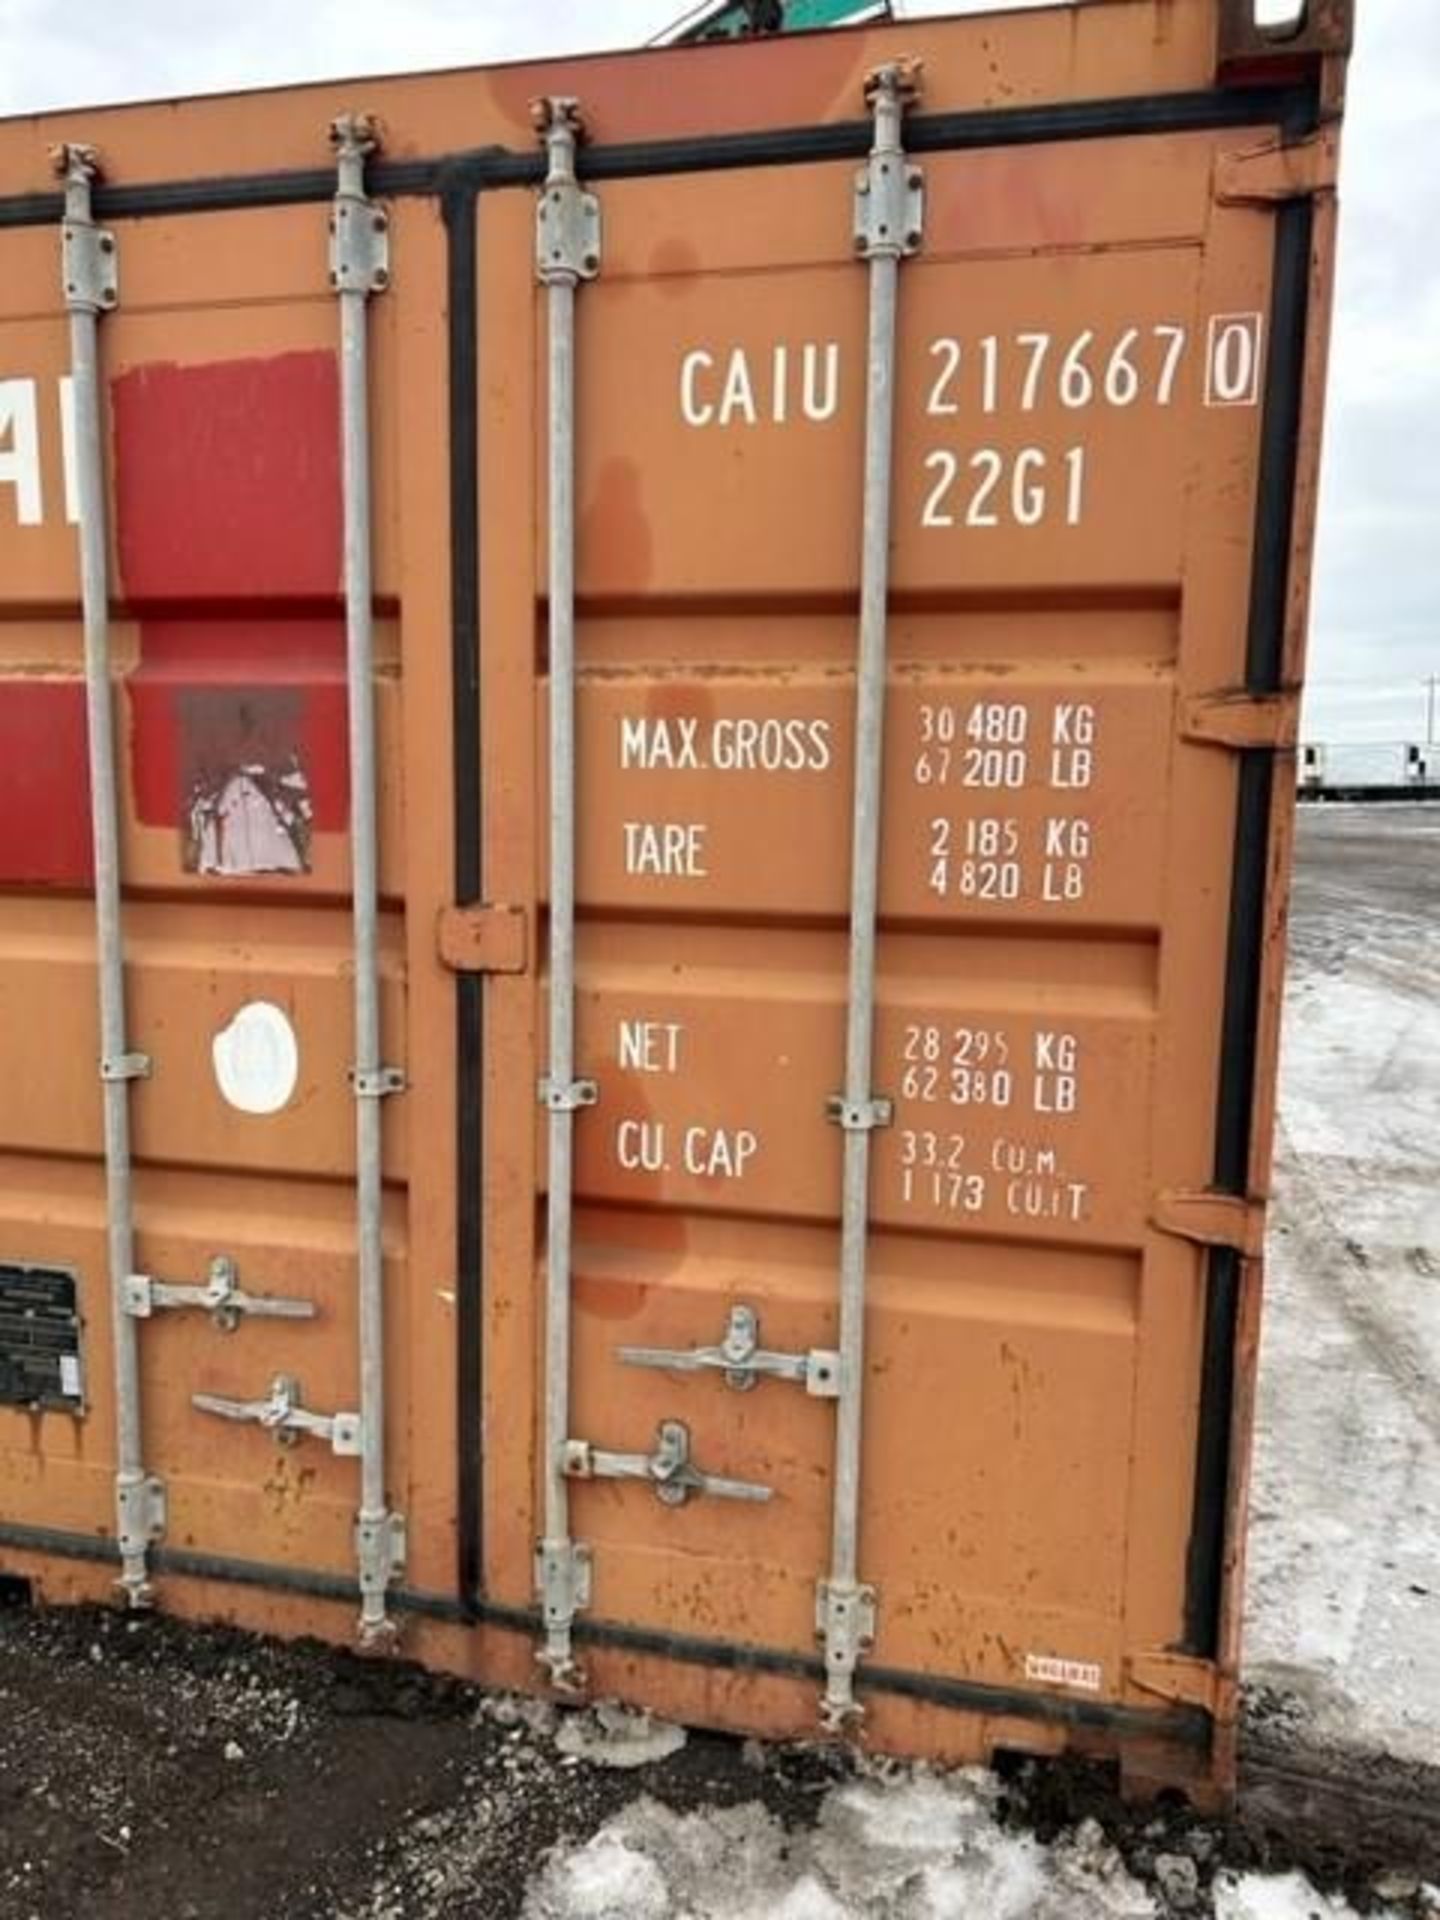 20' Sea Container SN#: CAIU2176670 (Located in S.E. Calgary) - Image 5 of 11